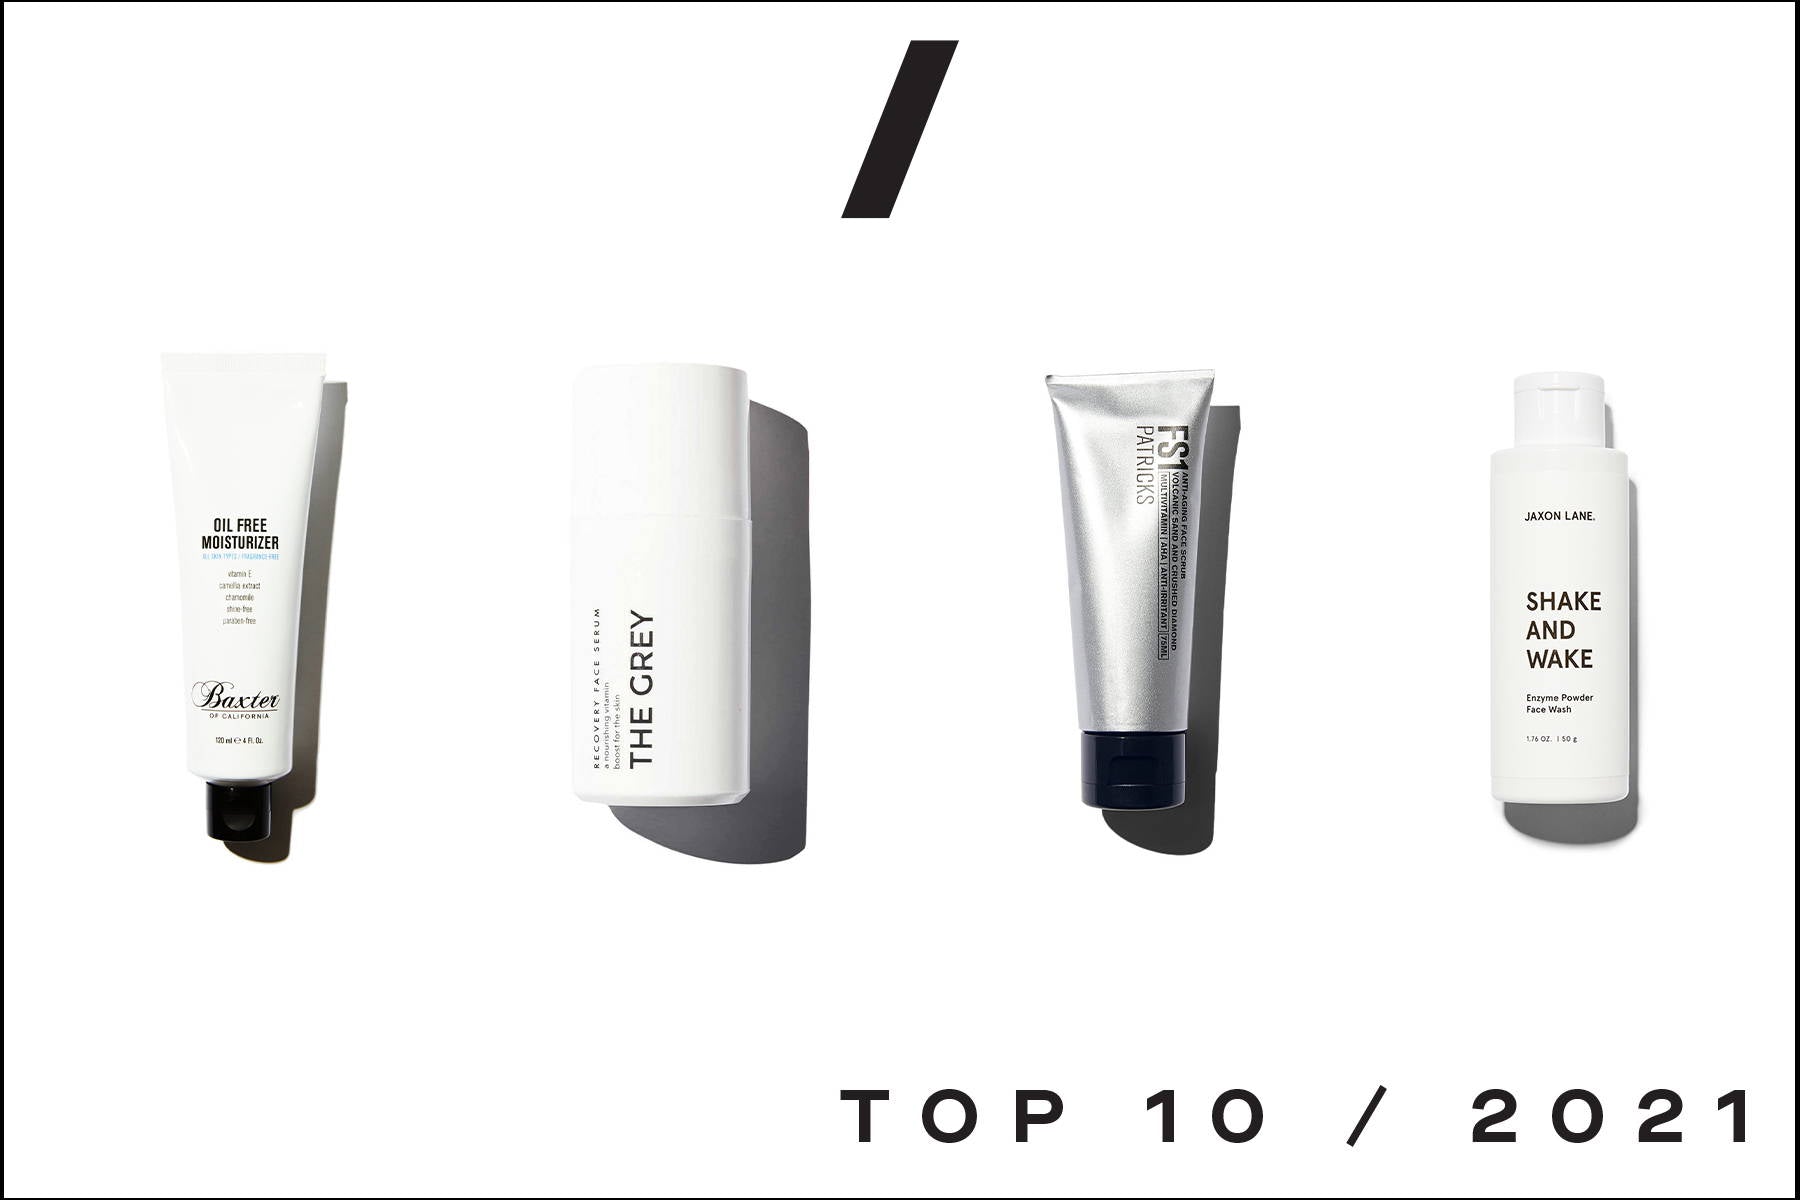 Our Top 10 Men's Grooming Products 2021